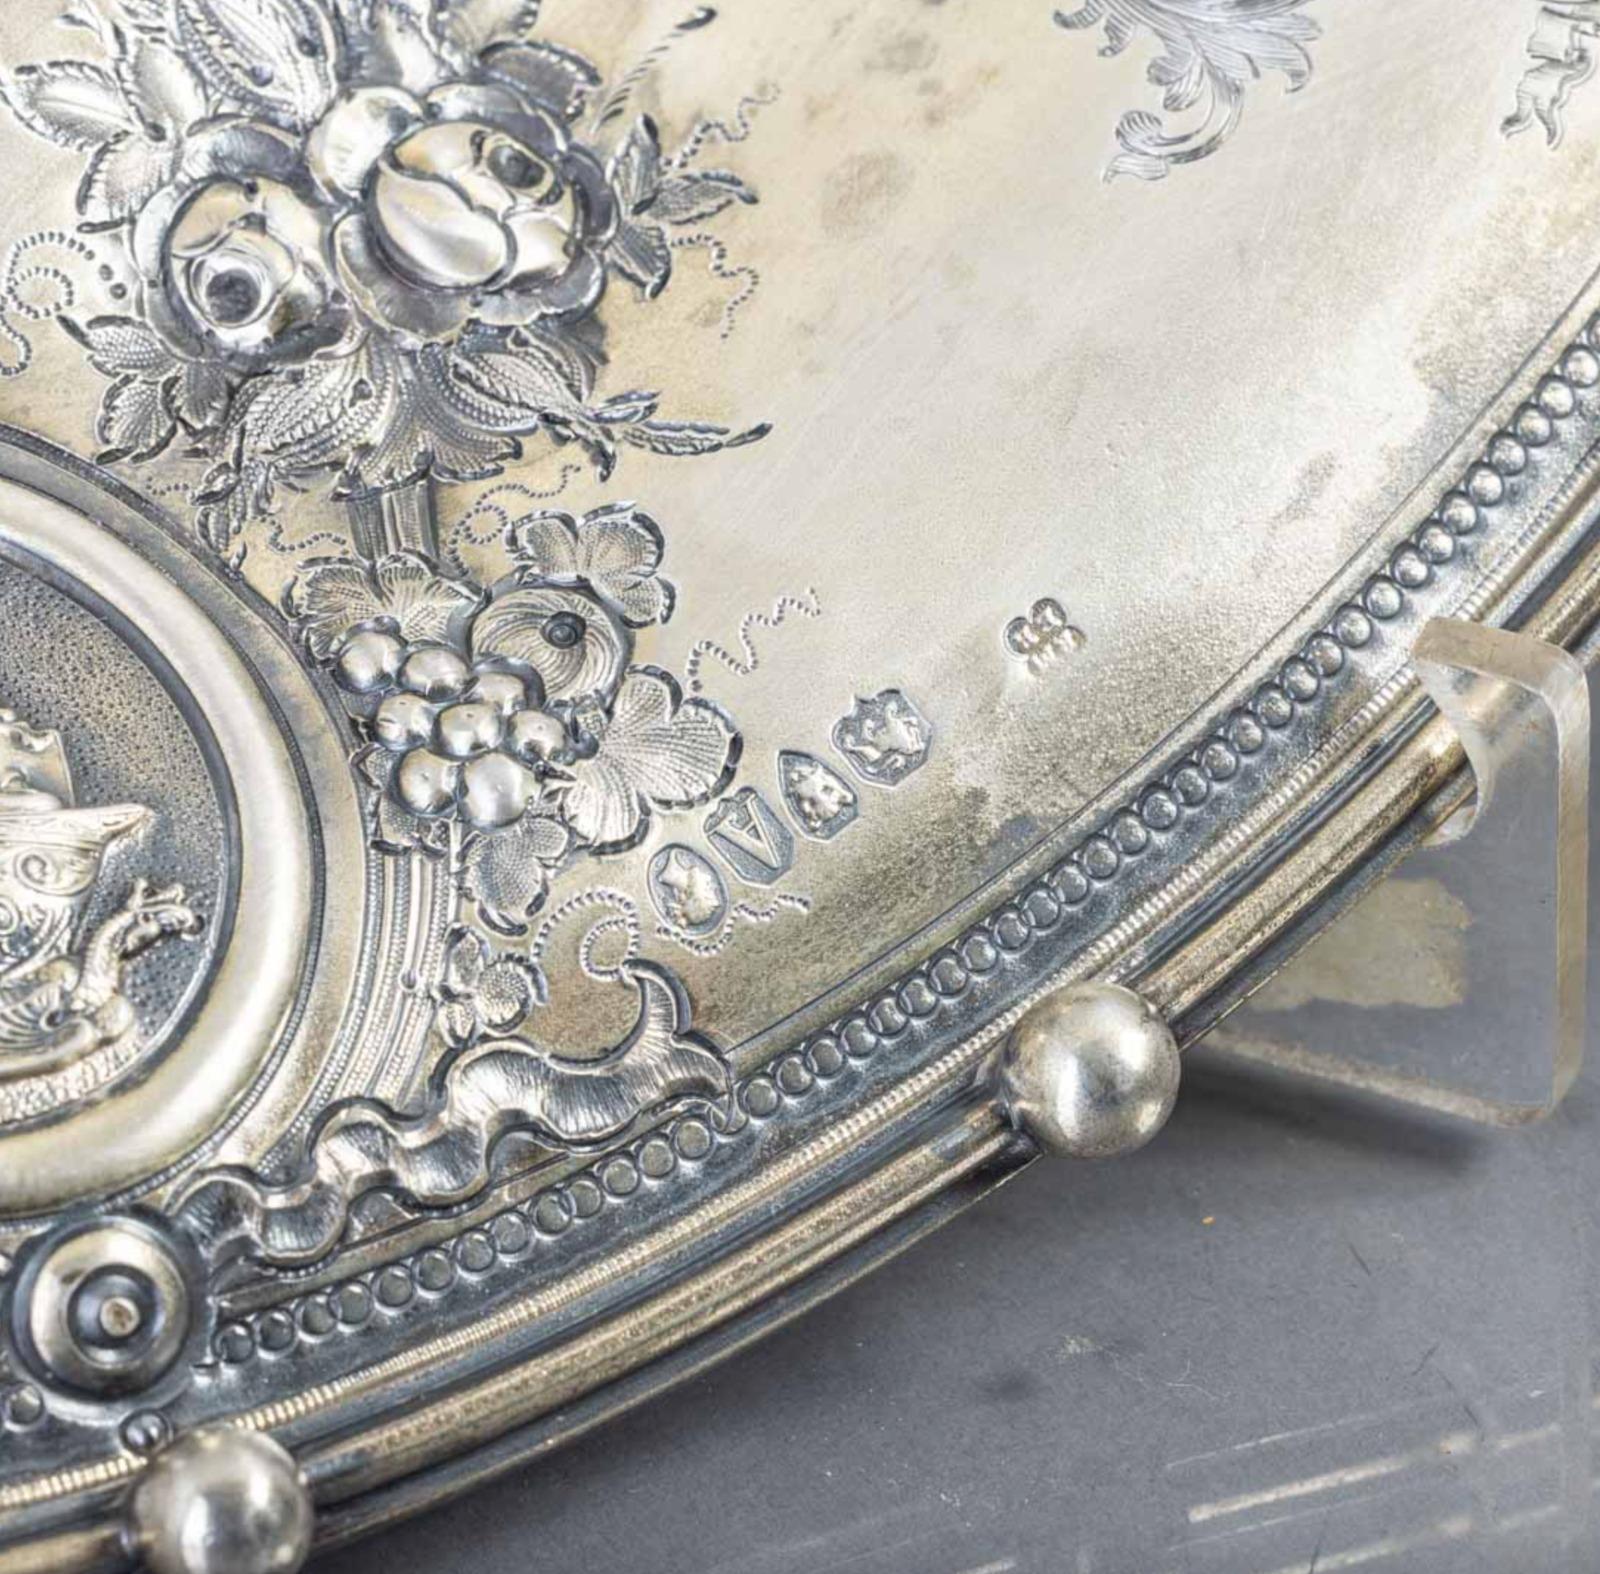 Important Lavender and Gomil
In English silver 19th century.

London brands and silversmith Martin, Hall & Co. (Richard Martin & Ebenezer Hall) 1863-1878

chiseled, drawn and engraved decoration with garlands, busts and English coats of